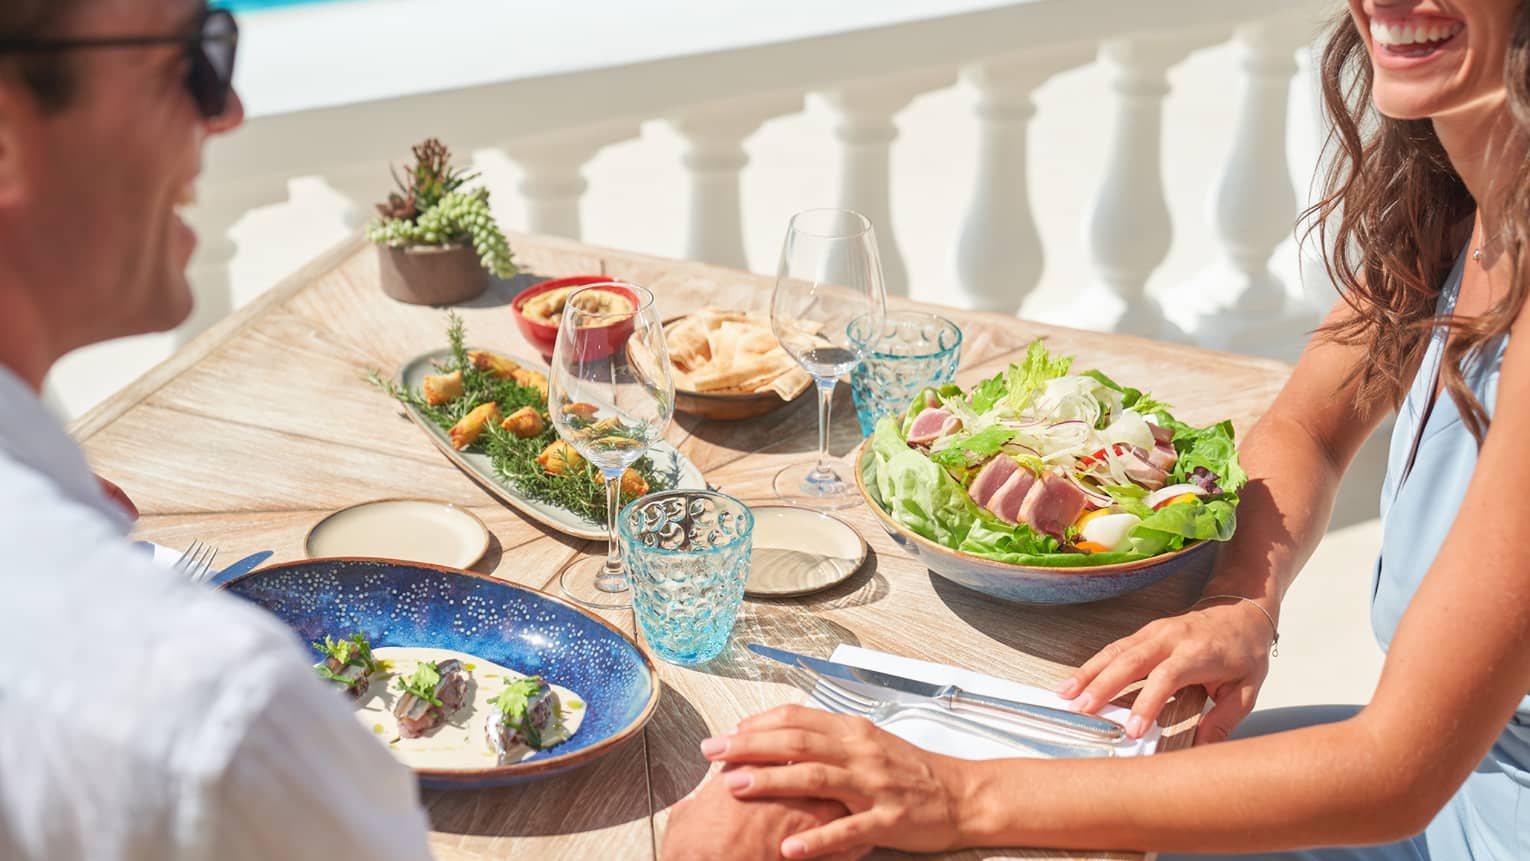 Couple smiling, dining on salad niçoise and other dishes beside white railing